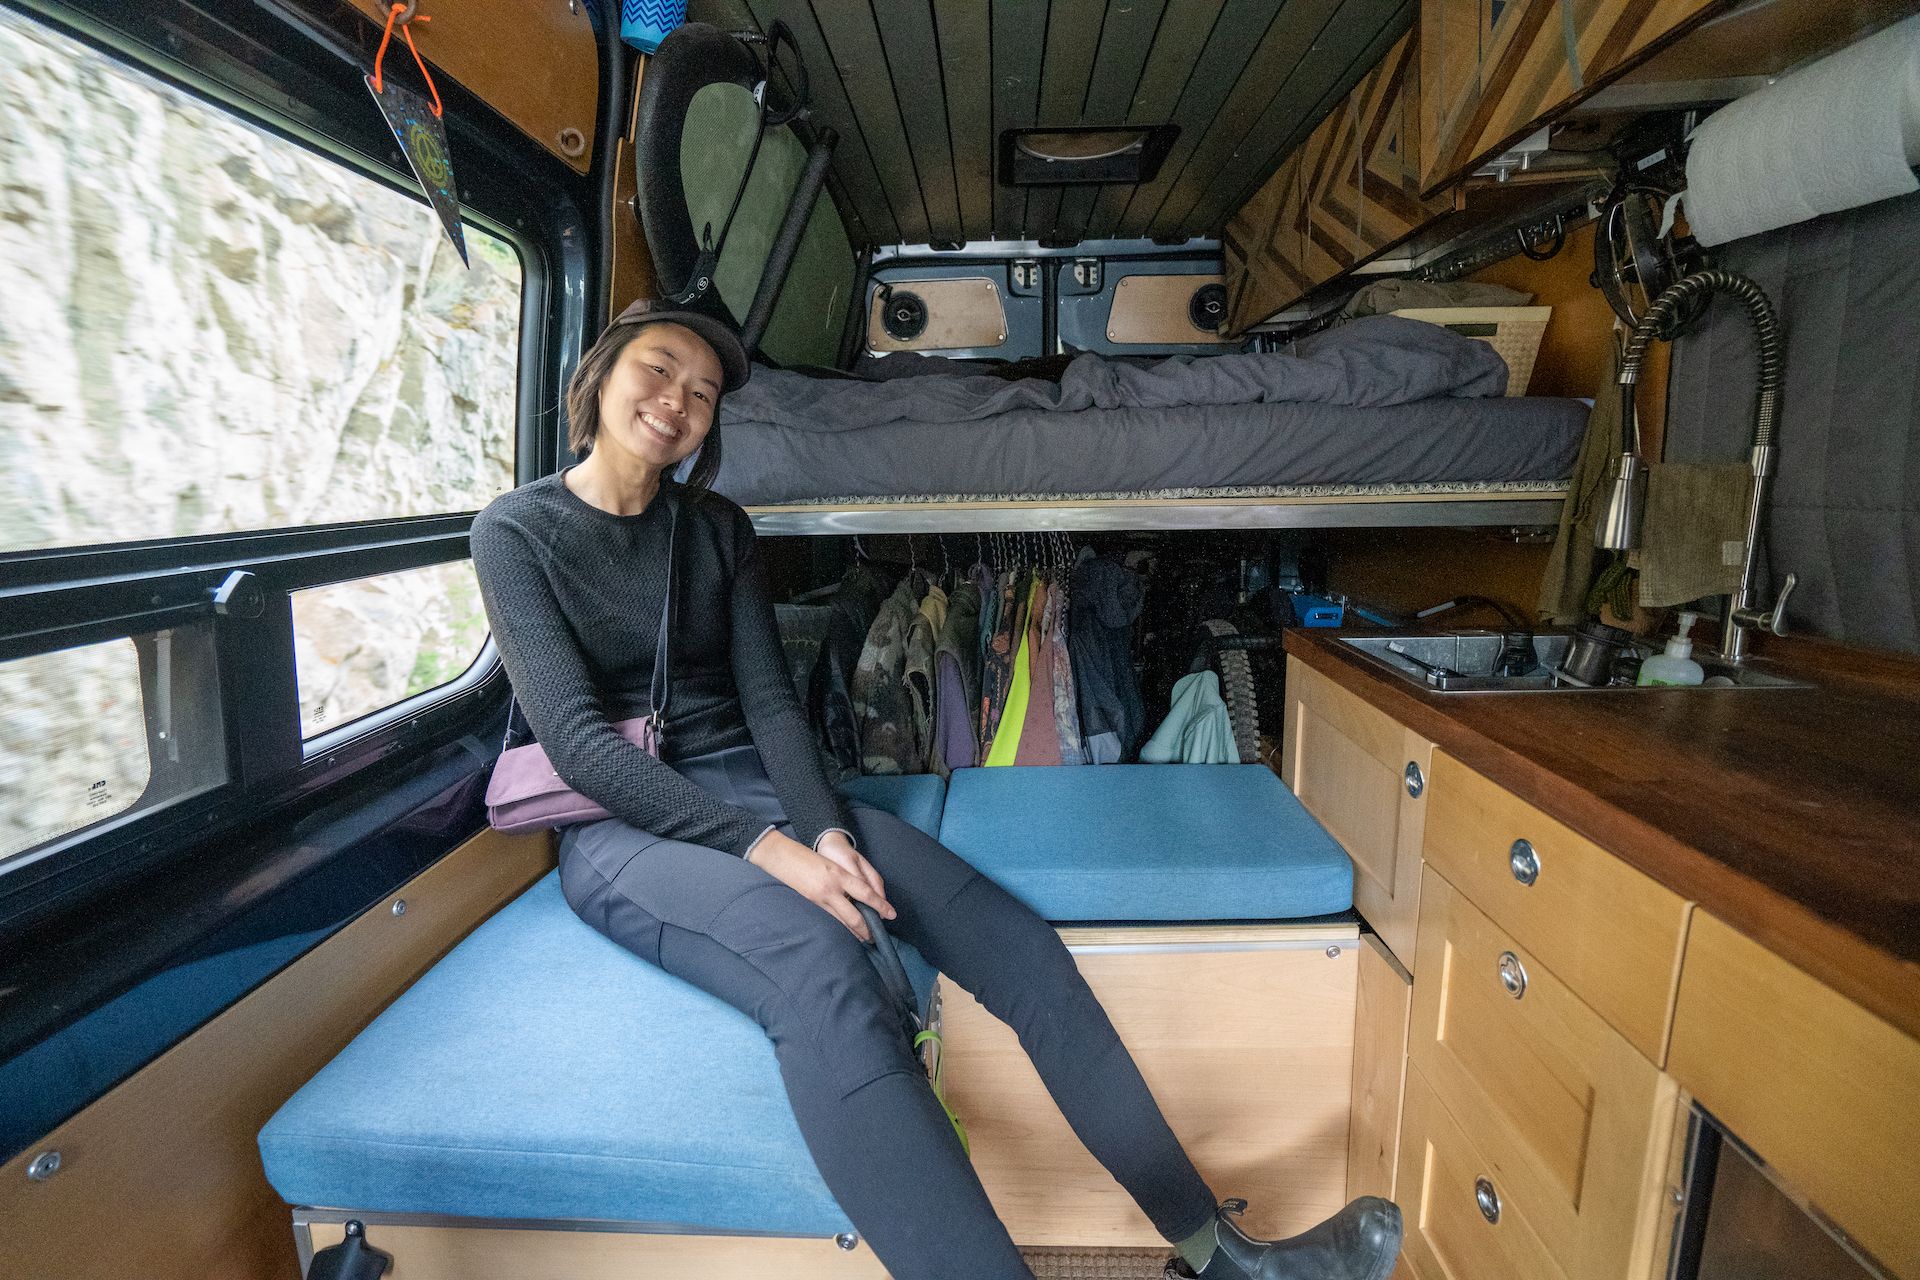 Kuan comfortable in the back. Ali built almost everything in the van himself. Look at the ceiling and cabinetry details! 🤩